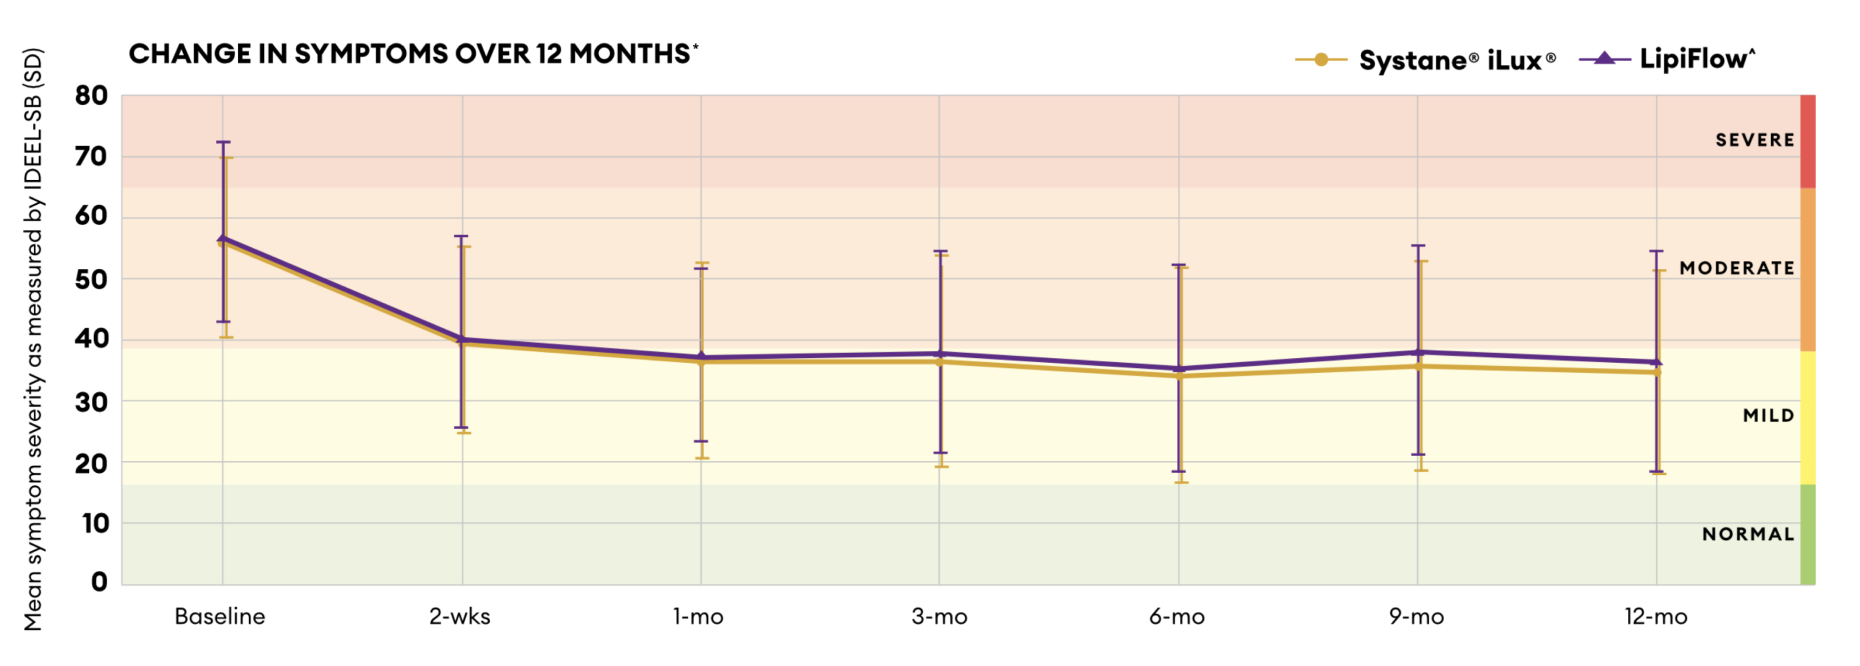 Graph showing change in symptoms of over 12 months of patients treated with Systane® iLux²® compared to that of those treated with LipiFlow